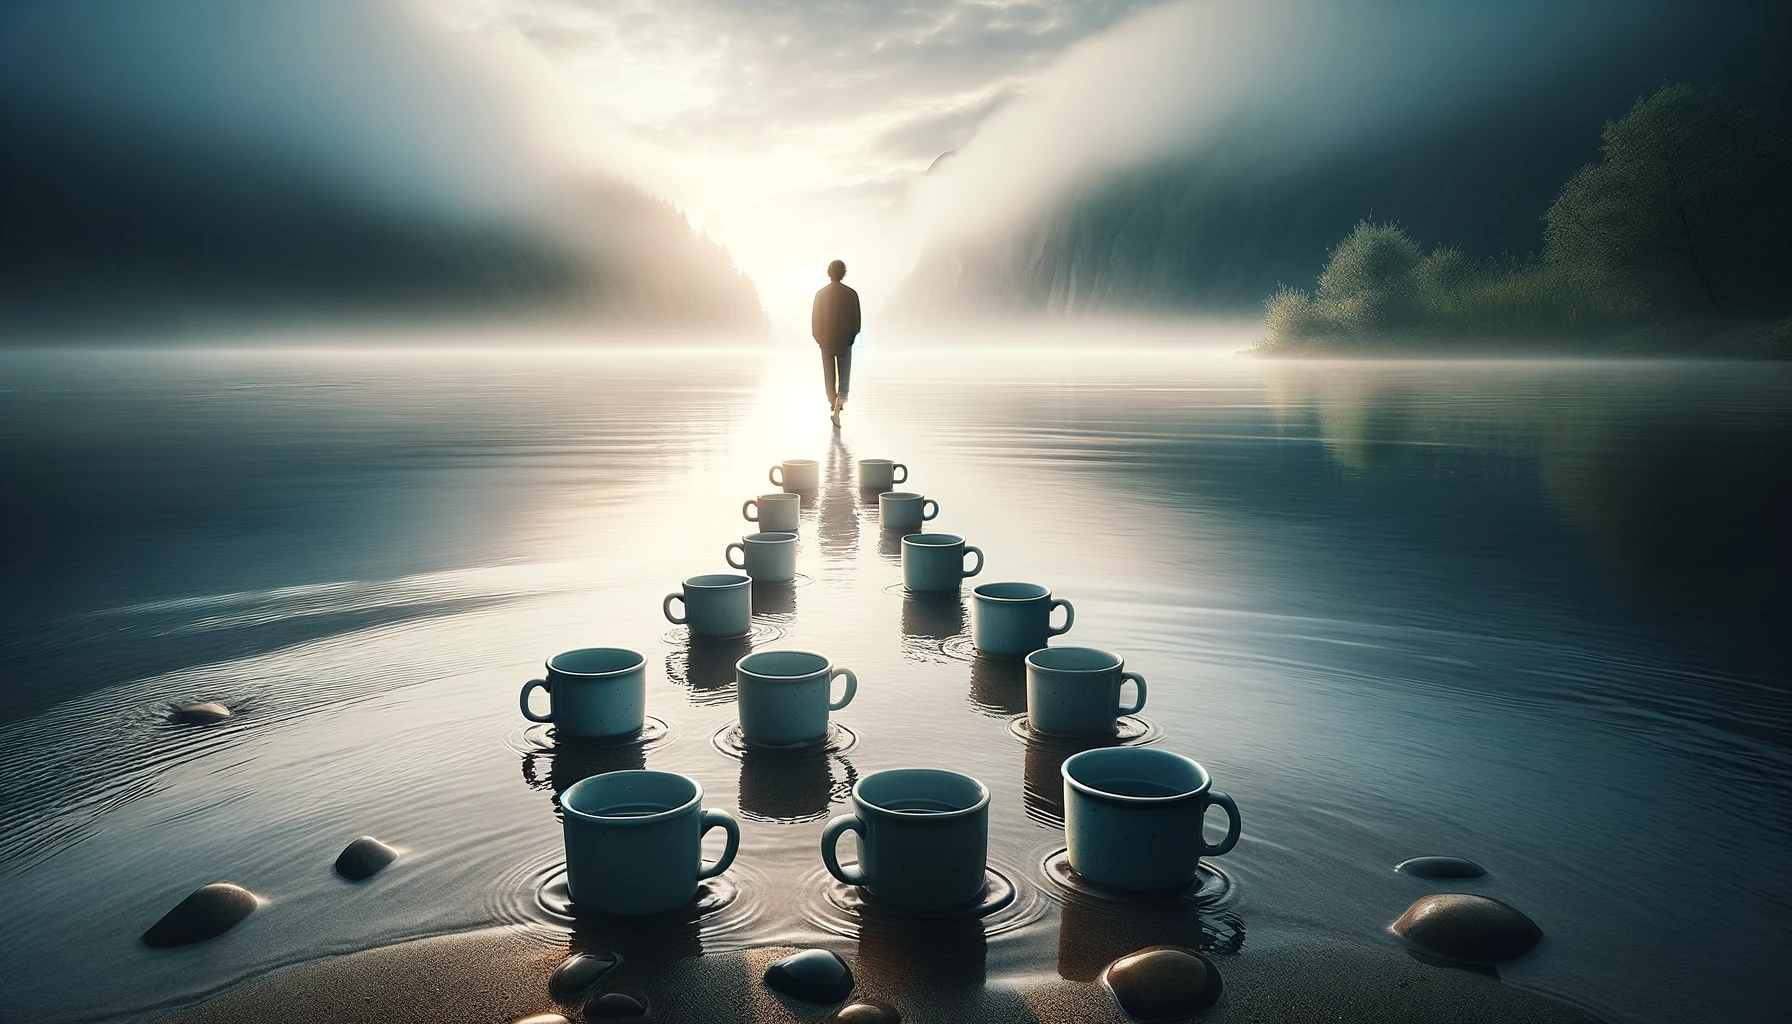 An image of a solitary figure walking away from a tranquil river leaving behind eight cups arranged neatly on the ground. The scene symbolizes a sens